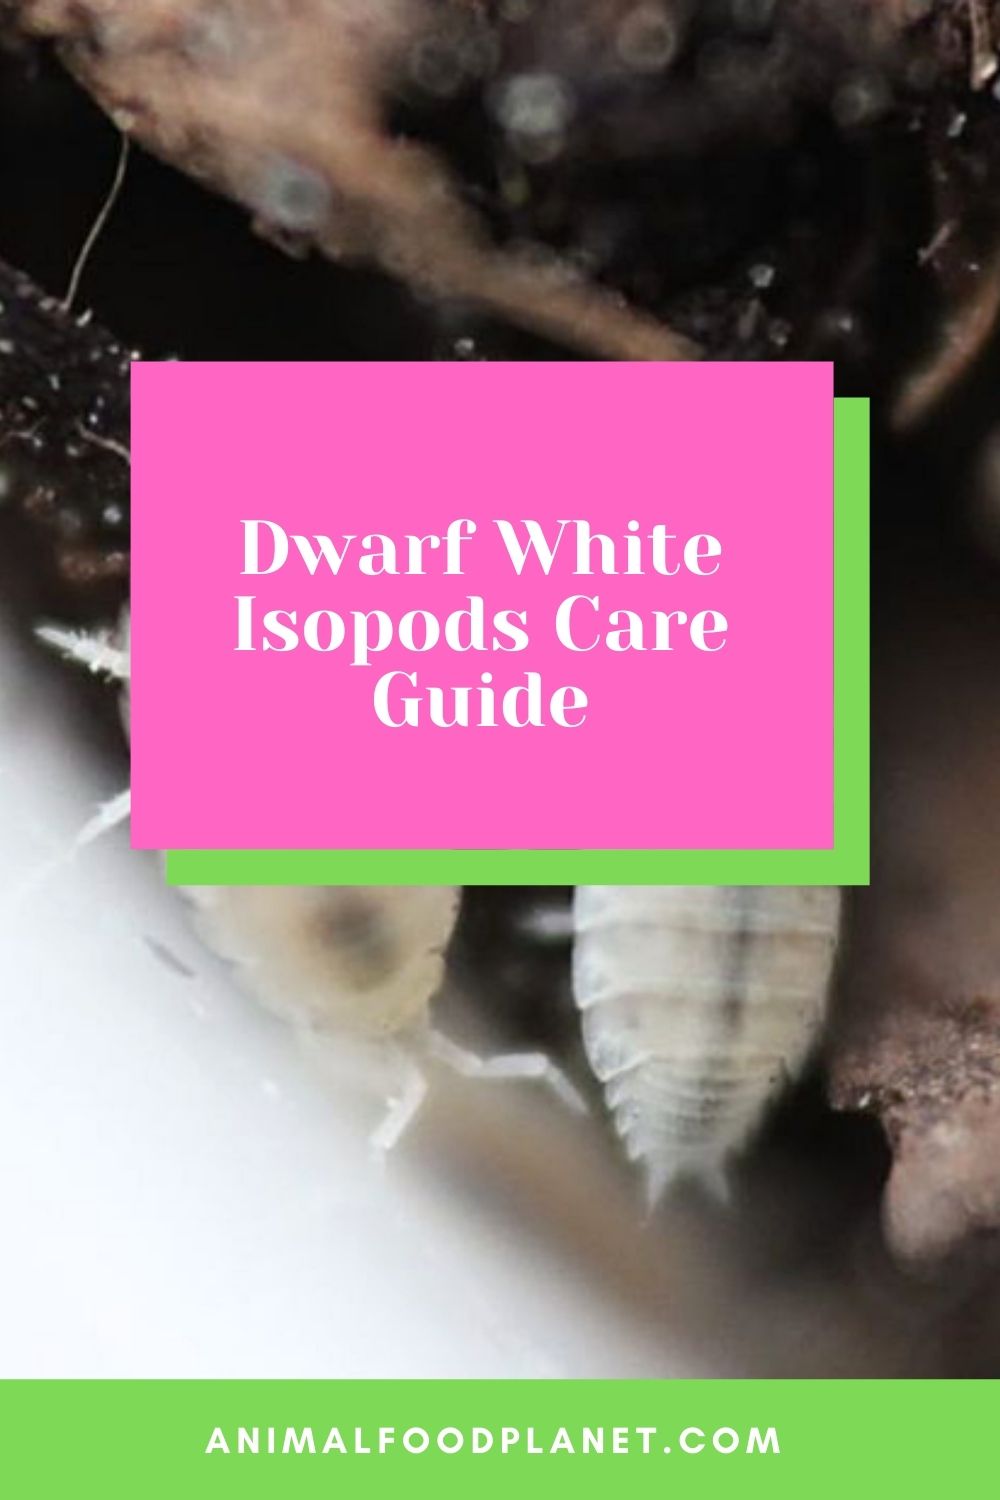 Dwarf White Isopods Care Guide